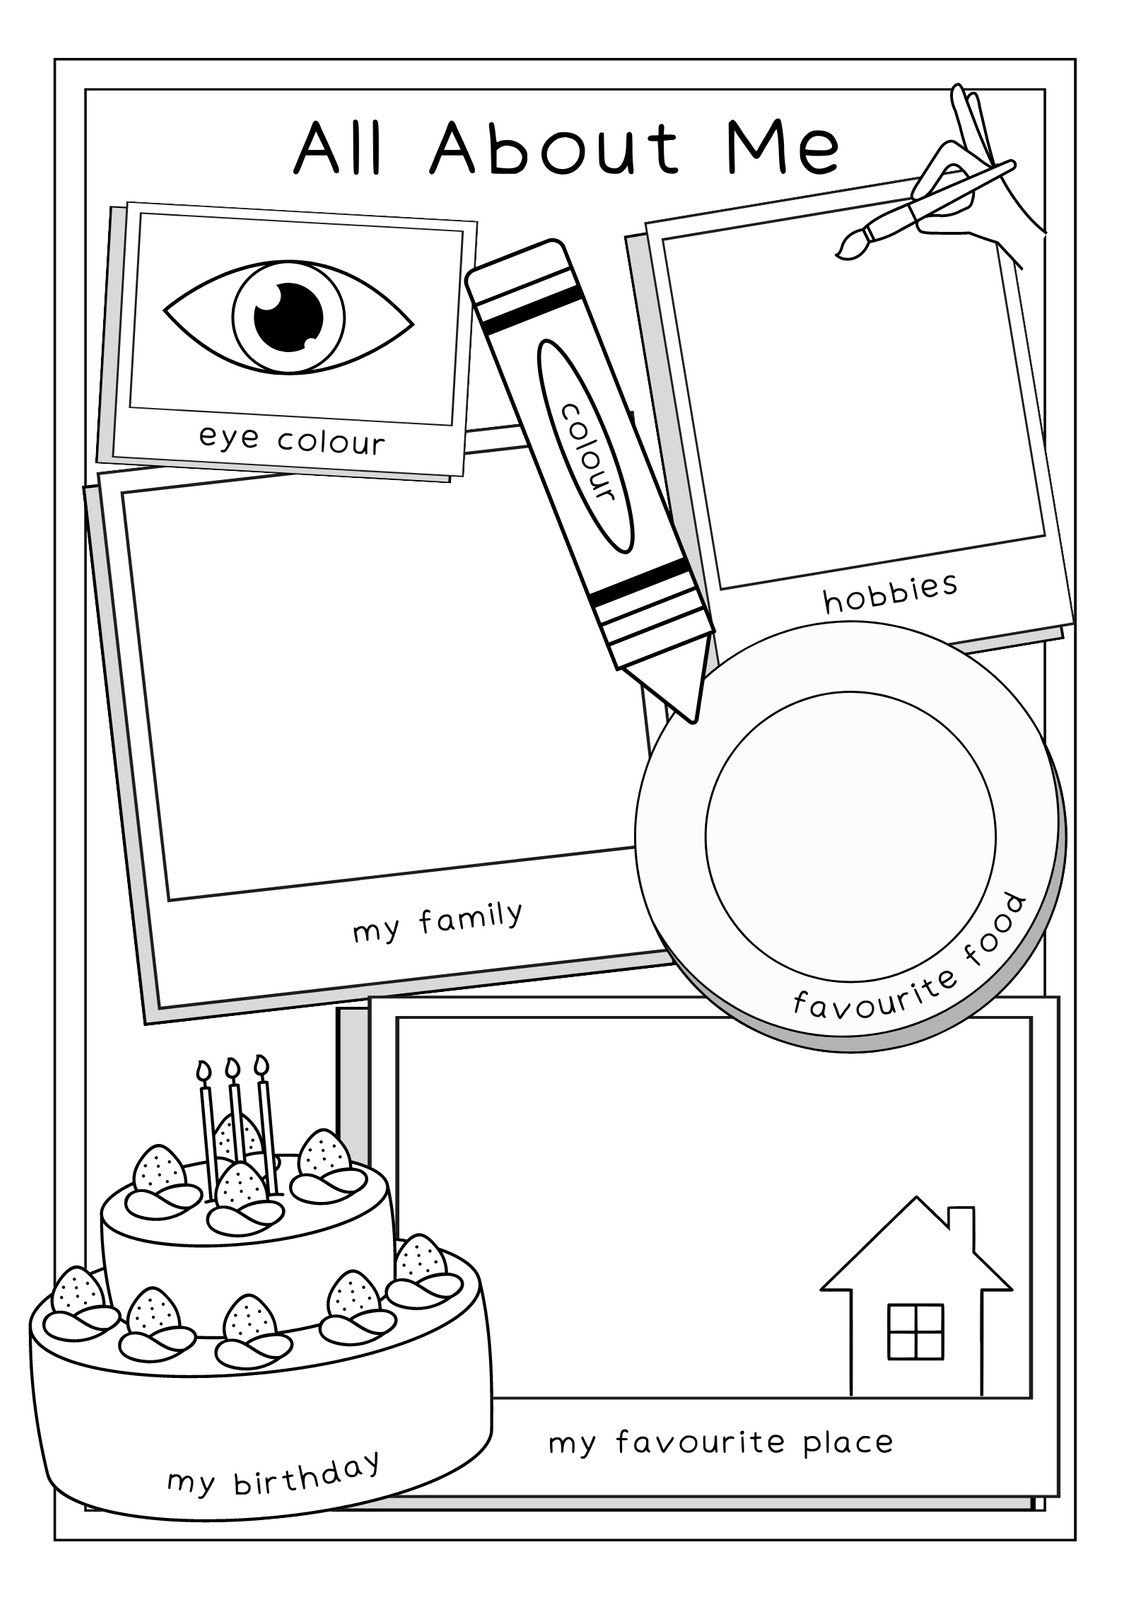 free-printable-all-about-me-worksheet-kindergarten-printable-form-templates-and-letter